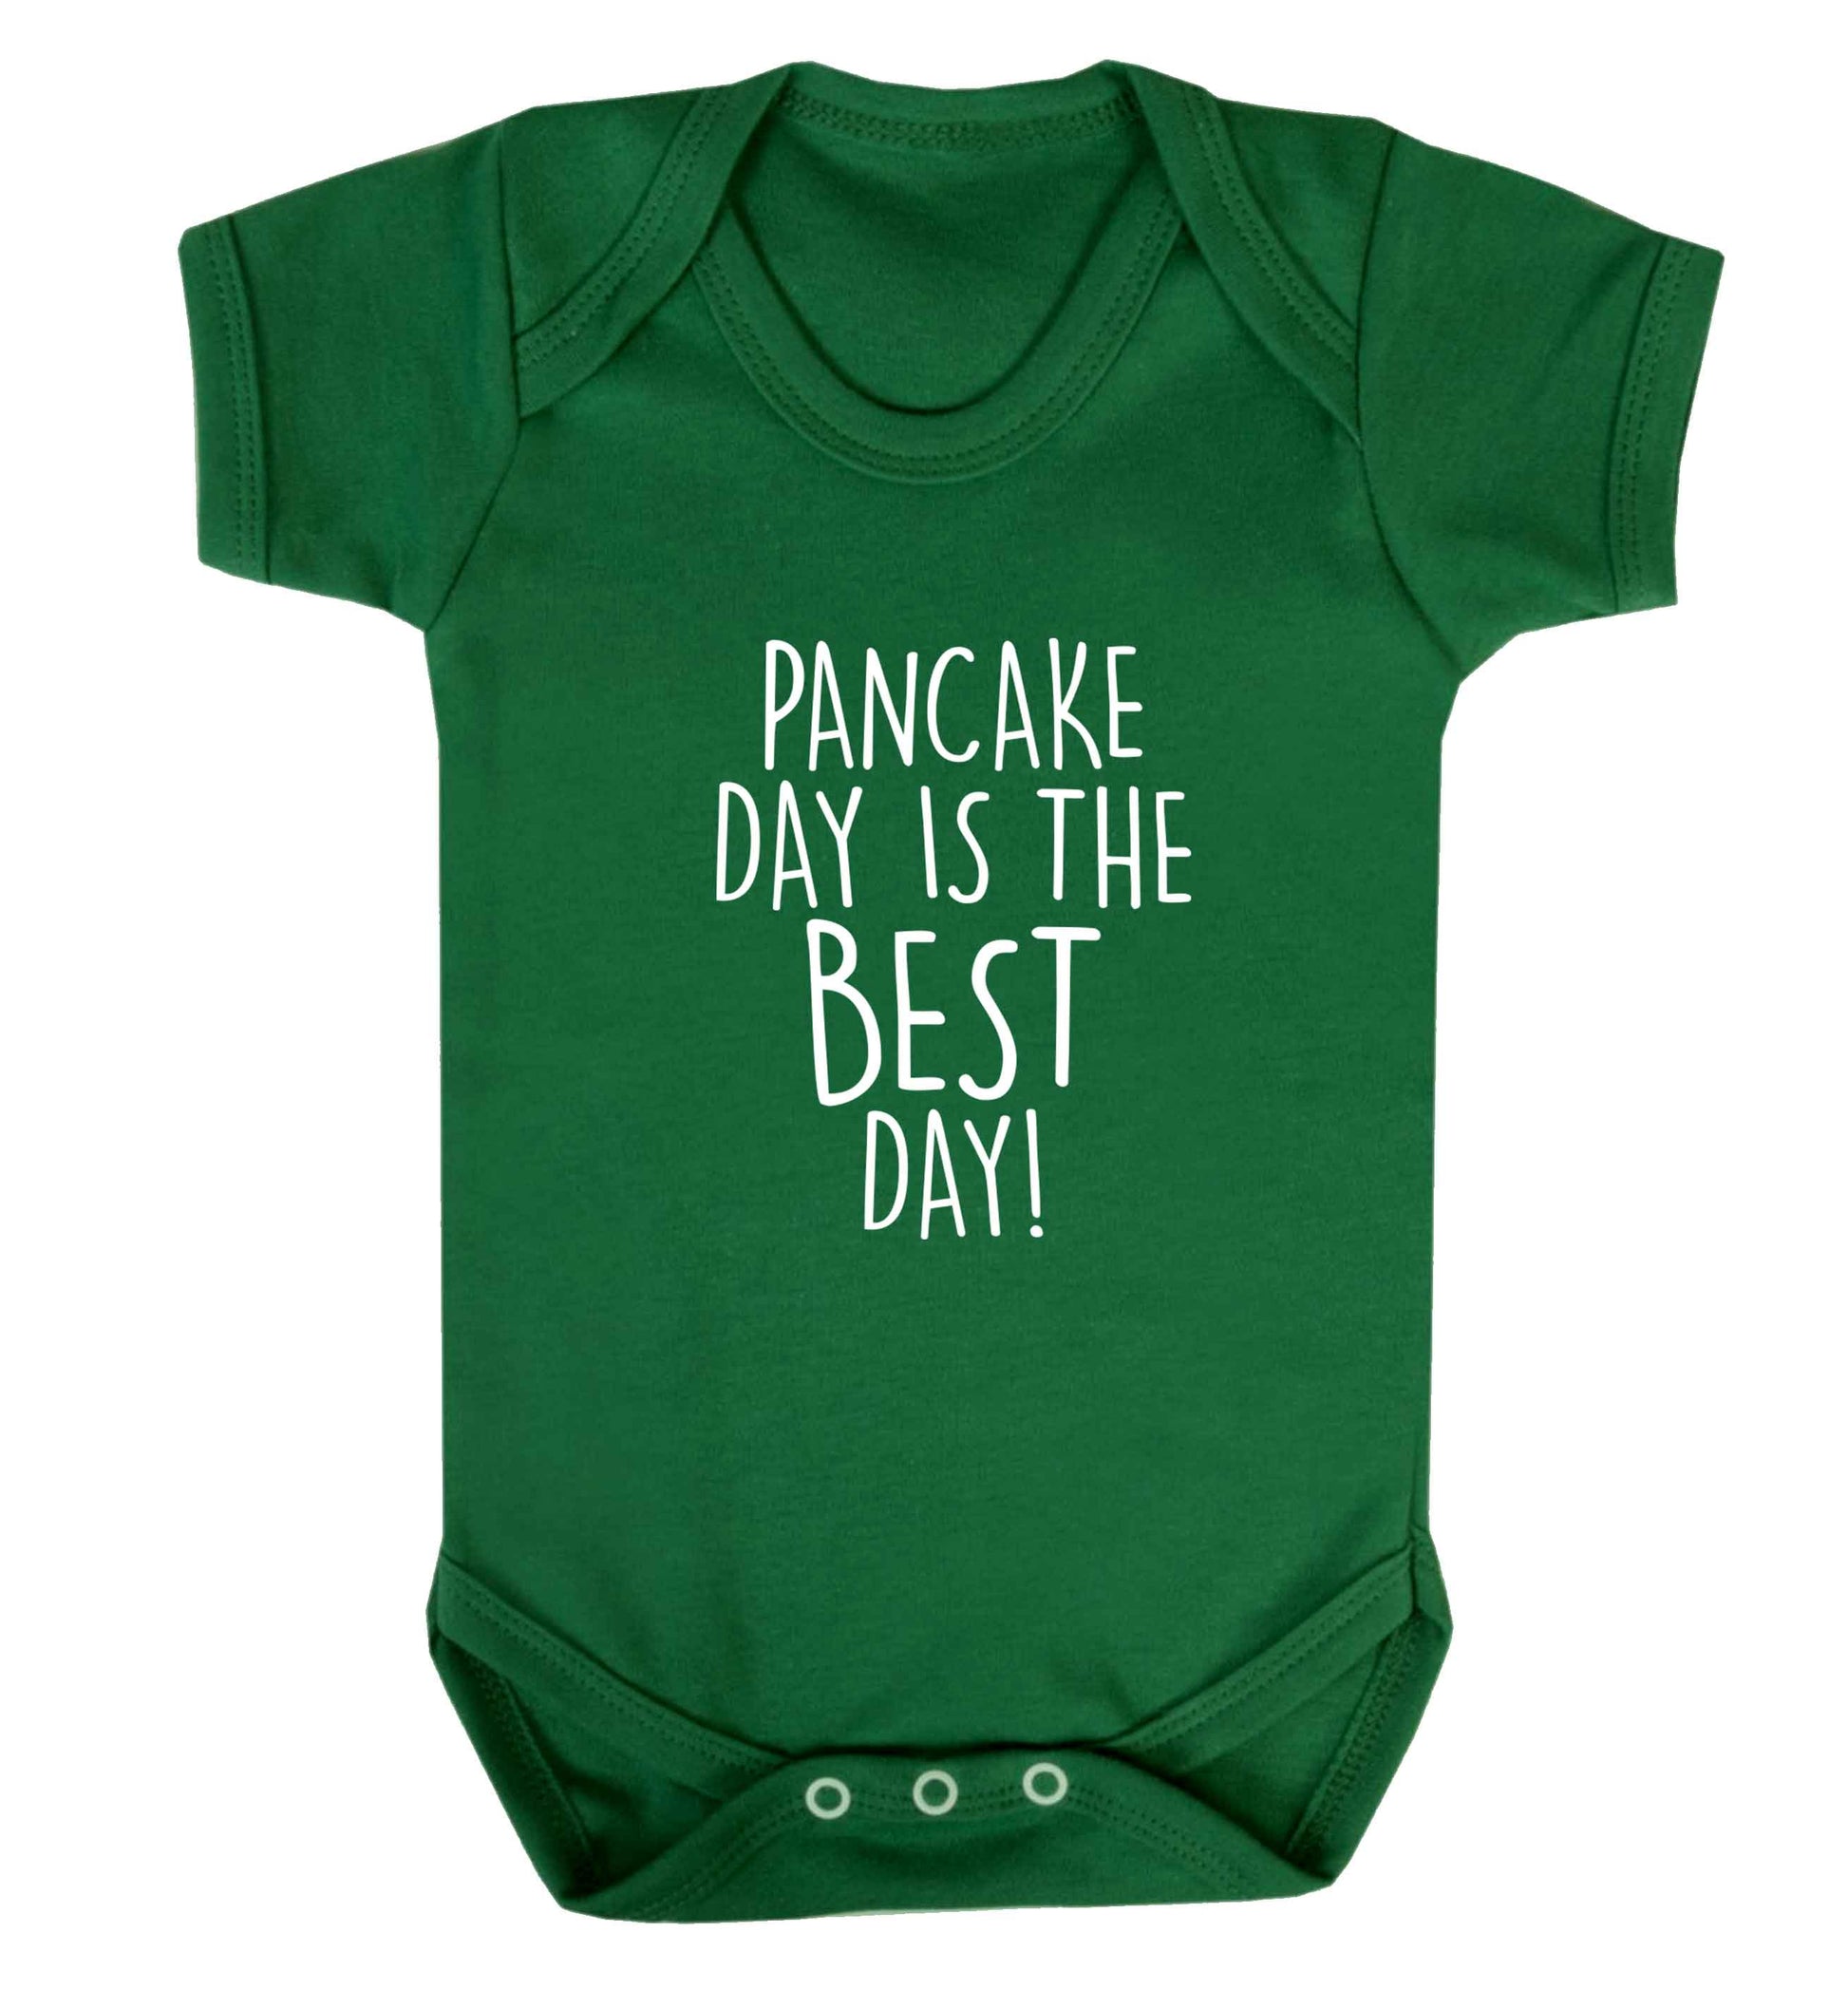 Pancake day is the best day baby vest green 18-24 months